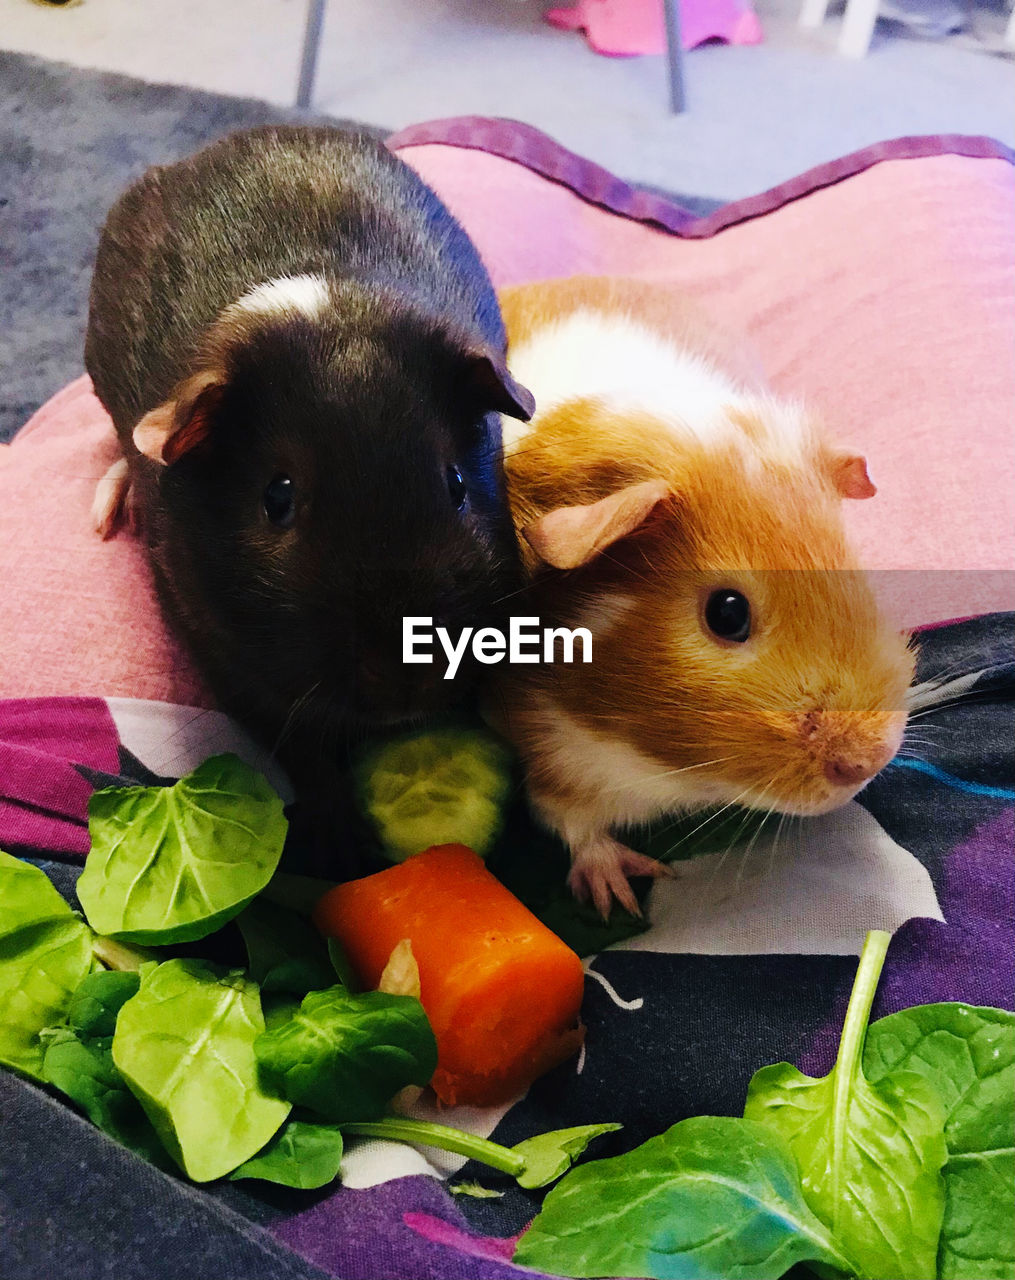 Guinea pigs lunch